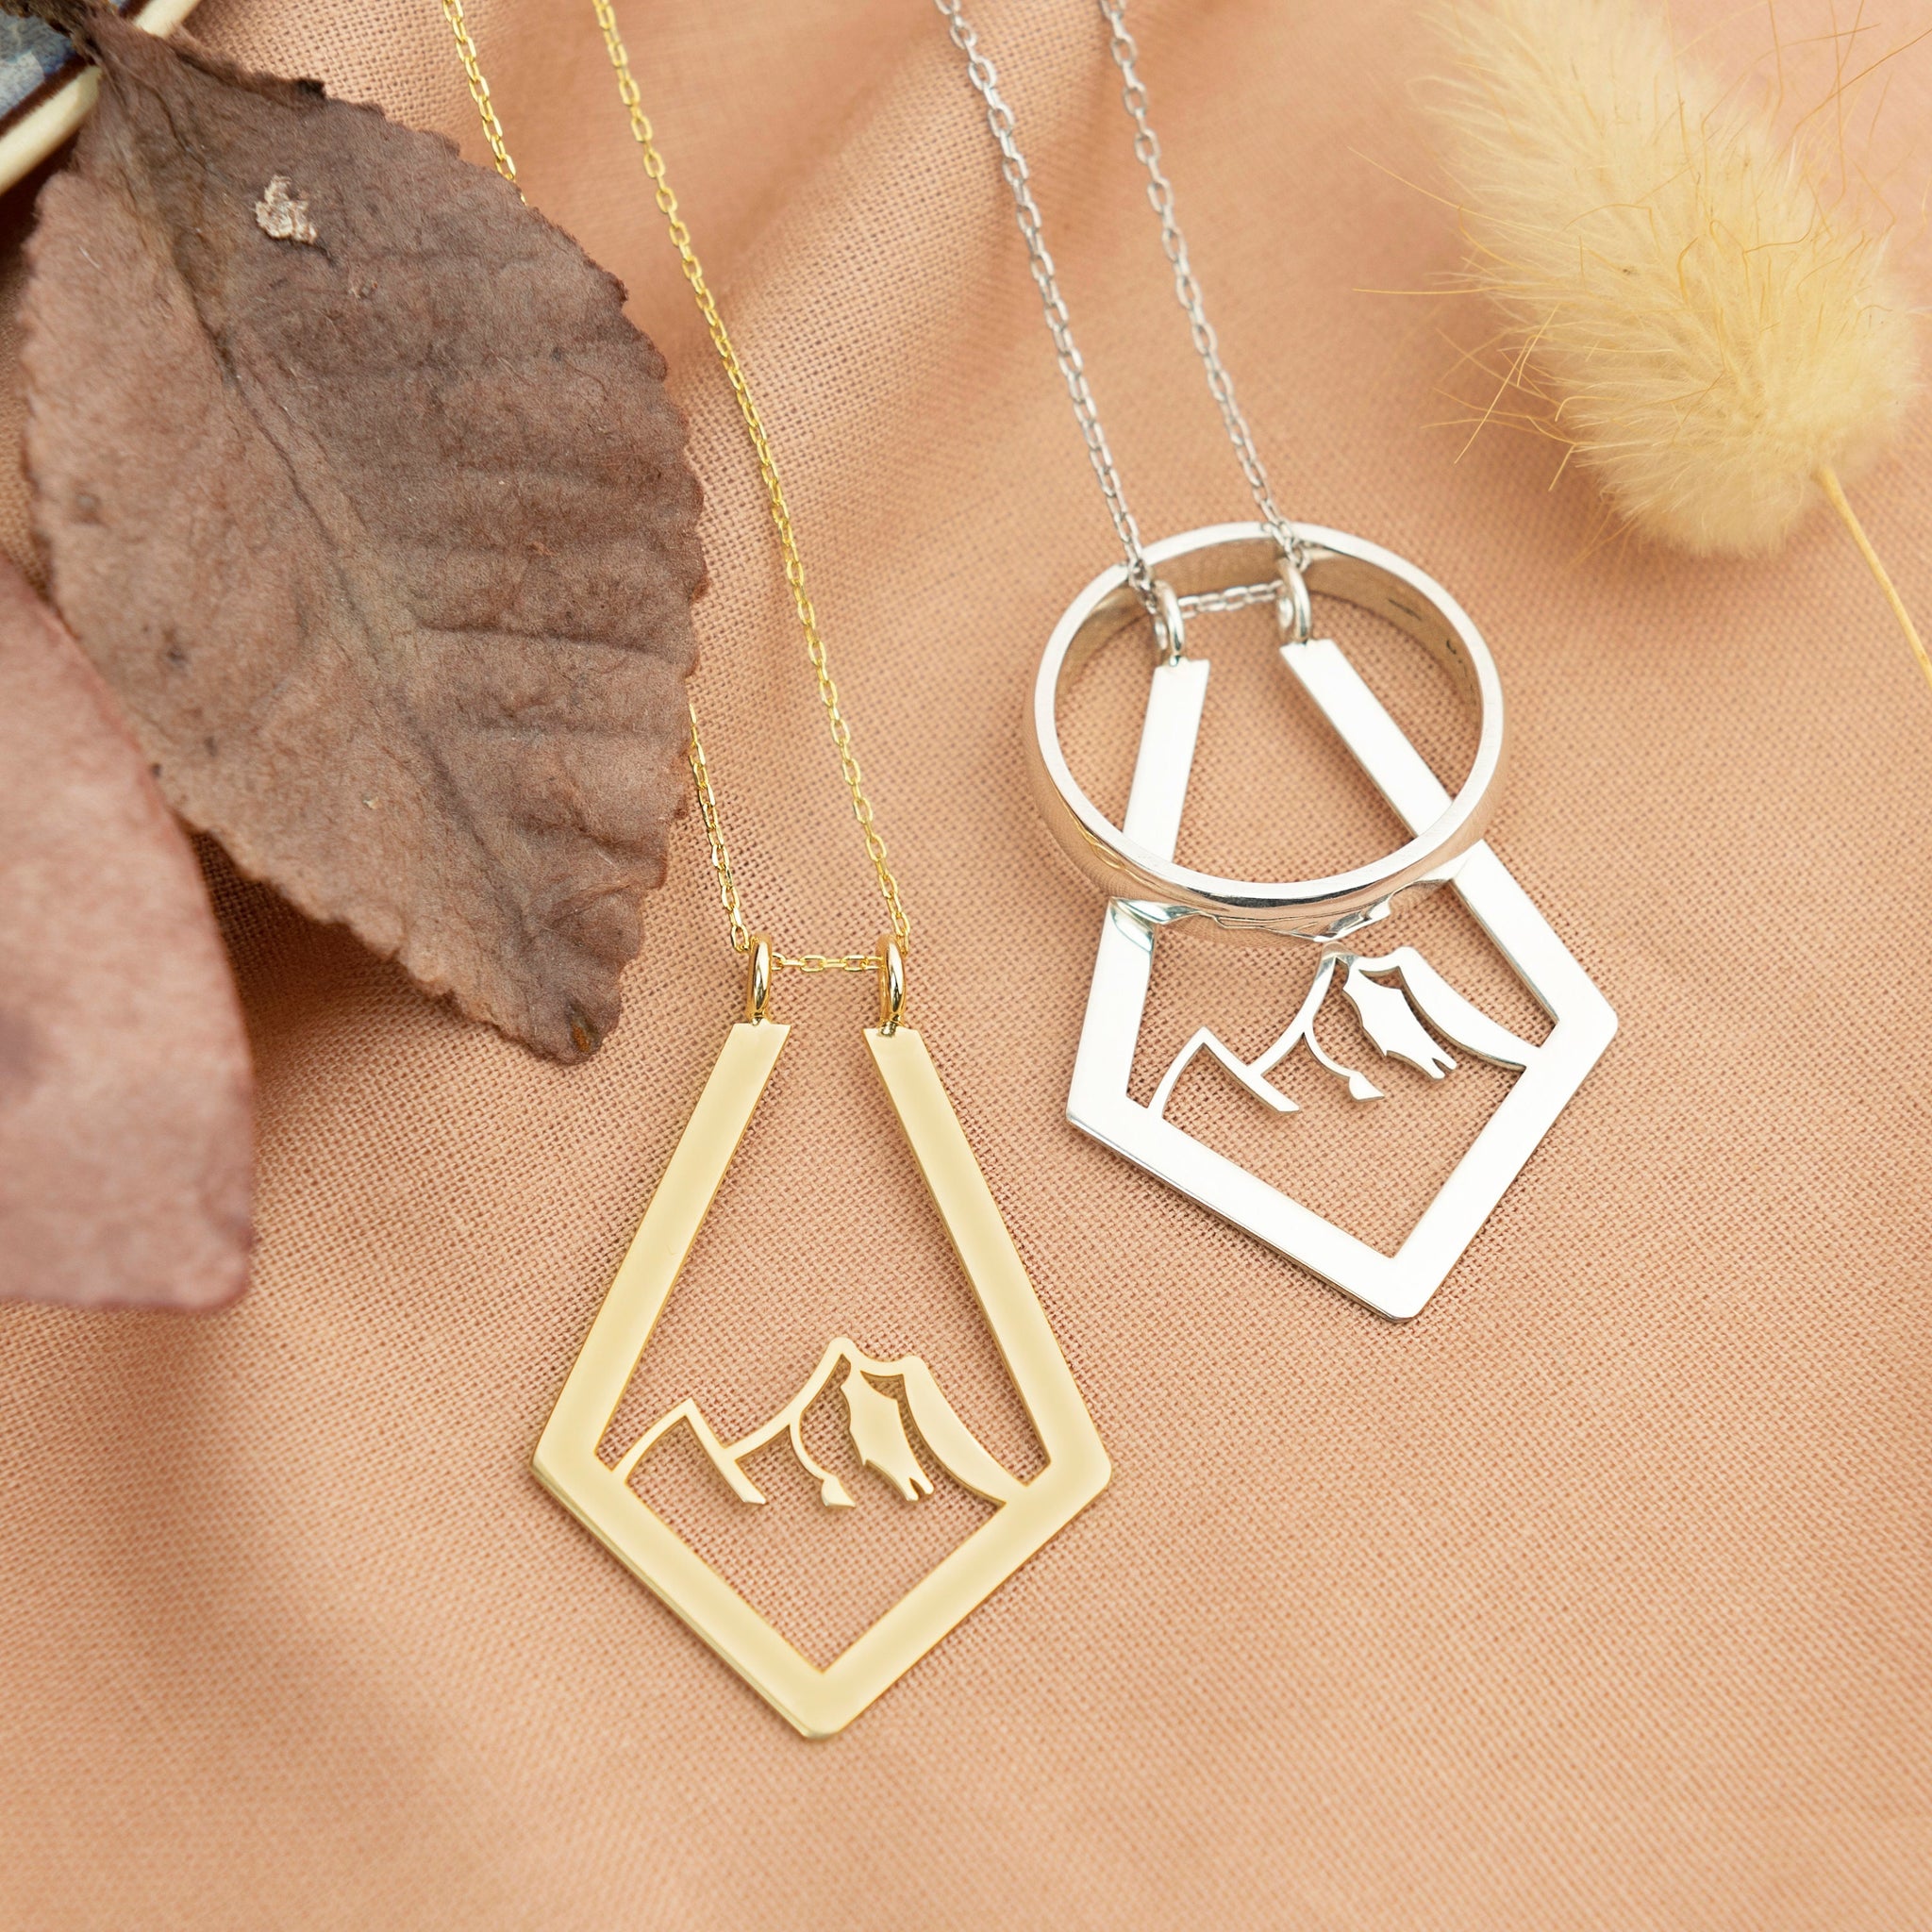 Geometric Mountain Ring Holder Necklace